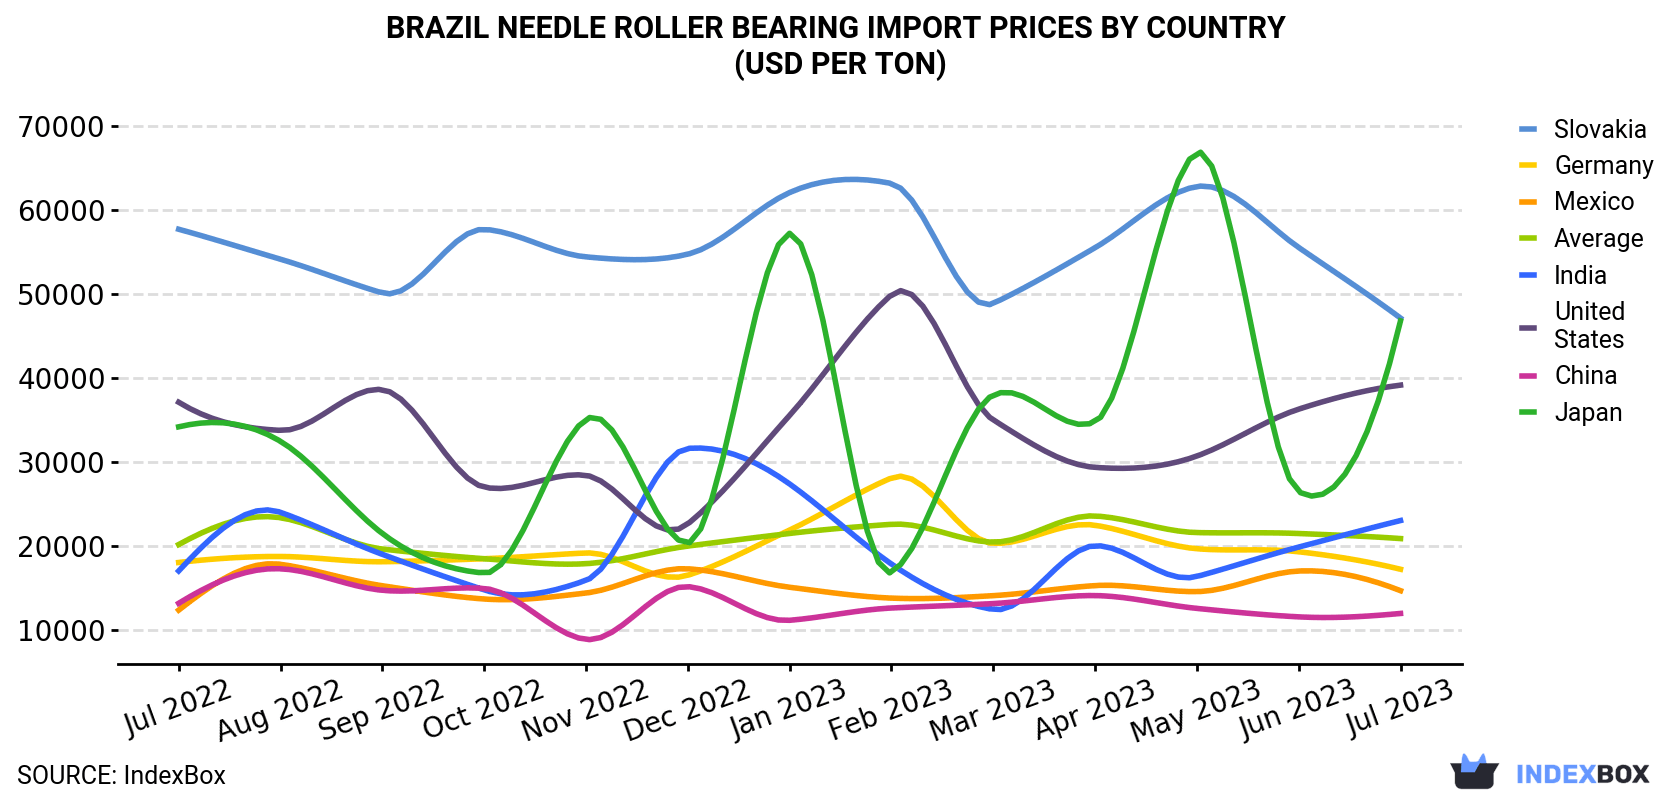 Brazil Needle Roller Bearing Import Prices By Country (USD Per Ton)